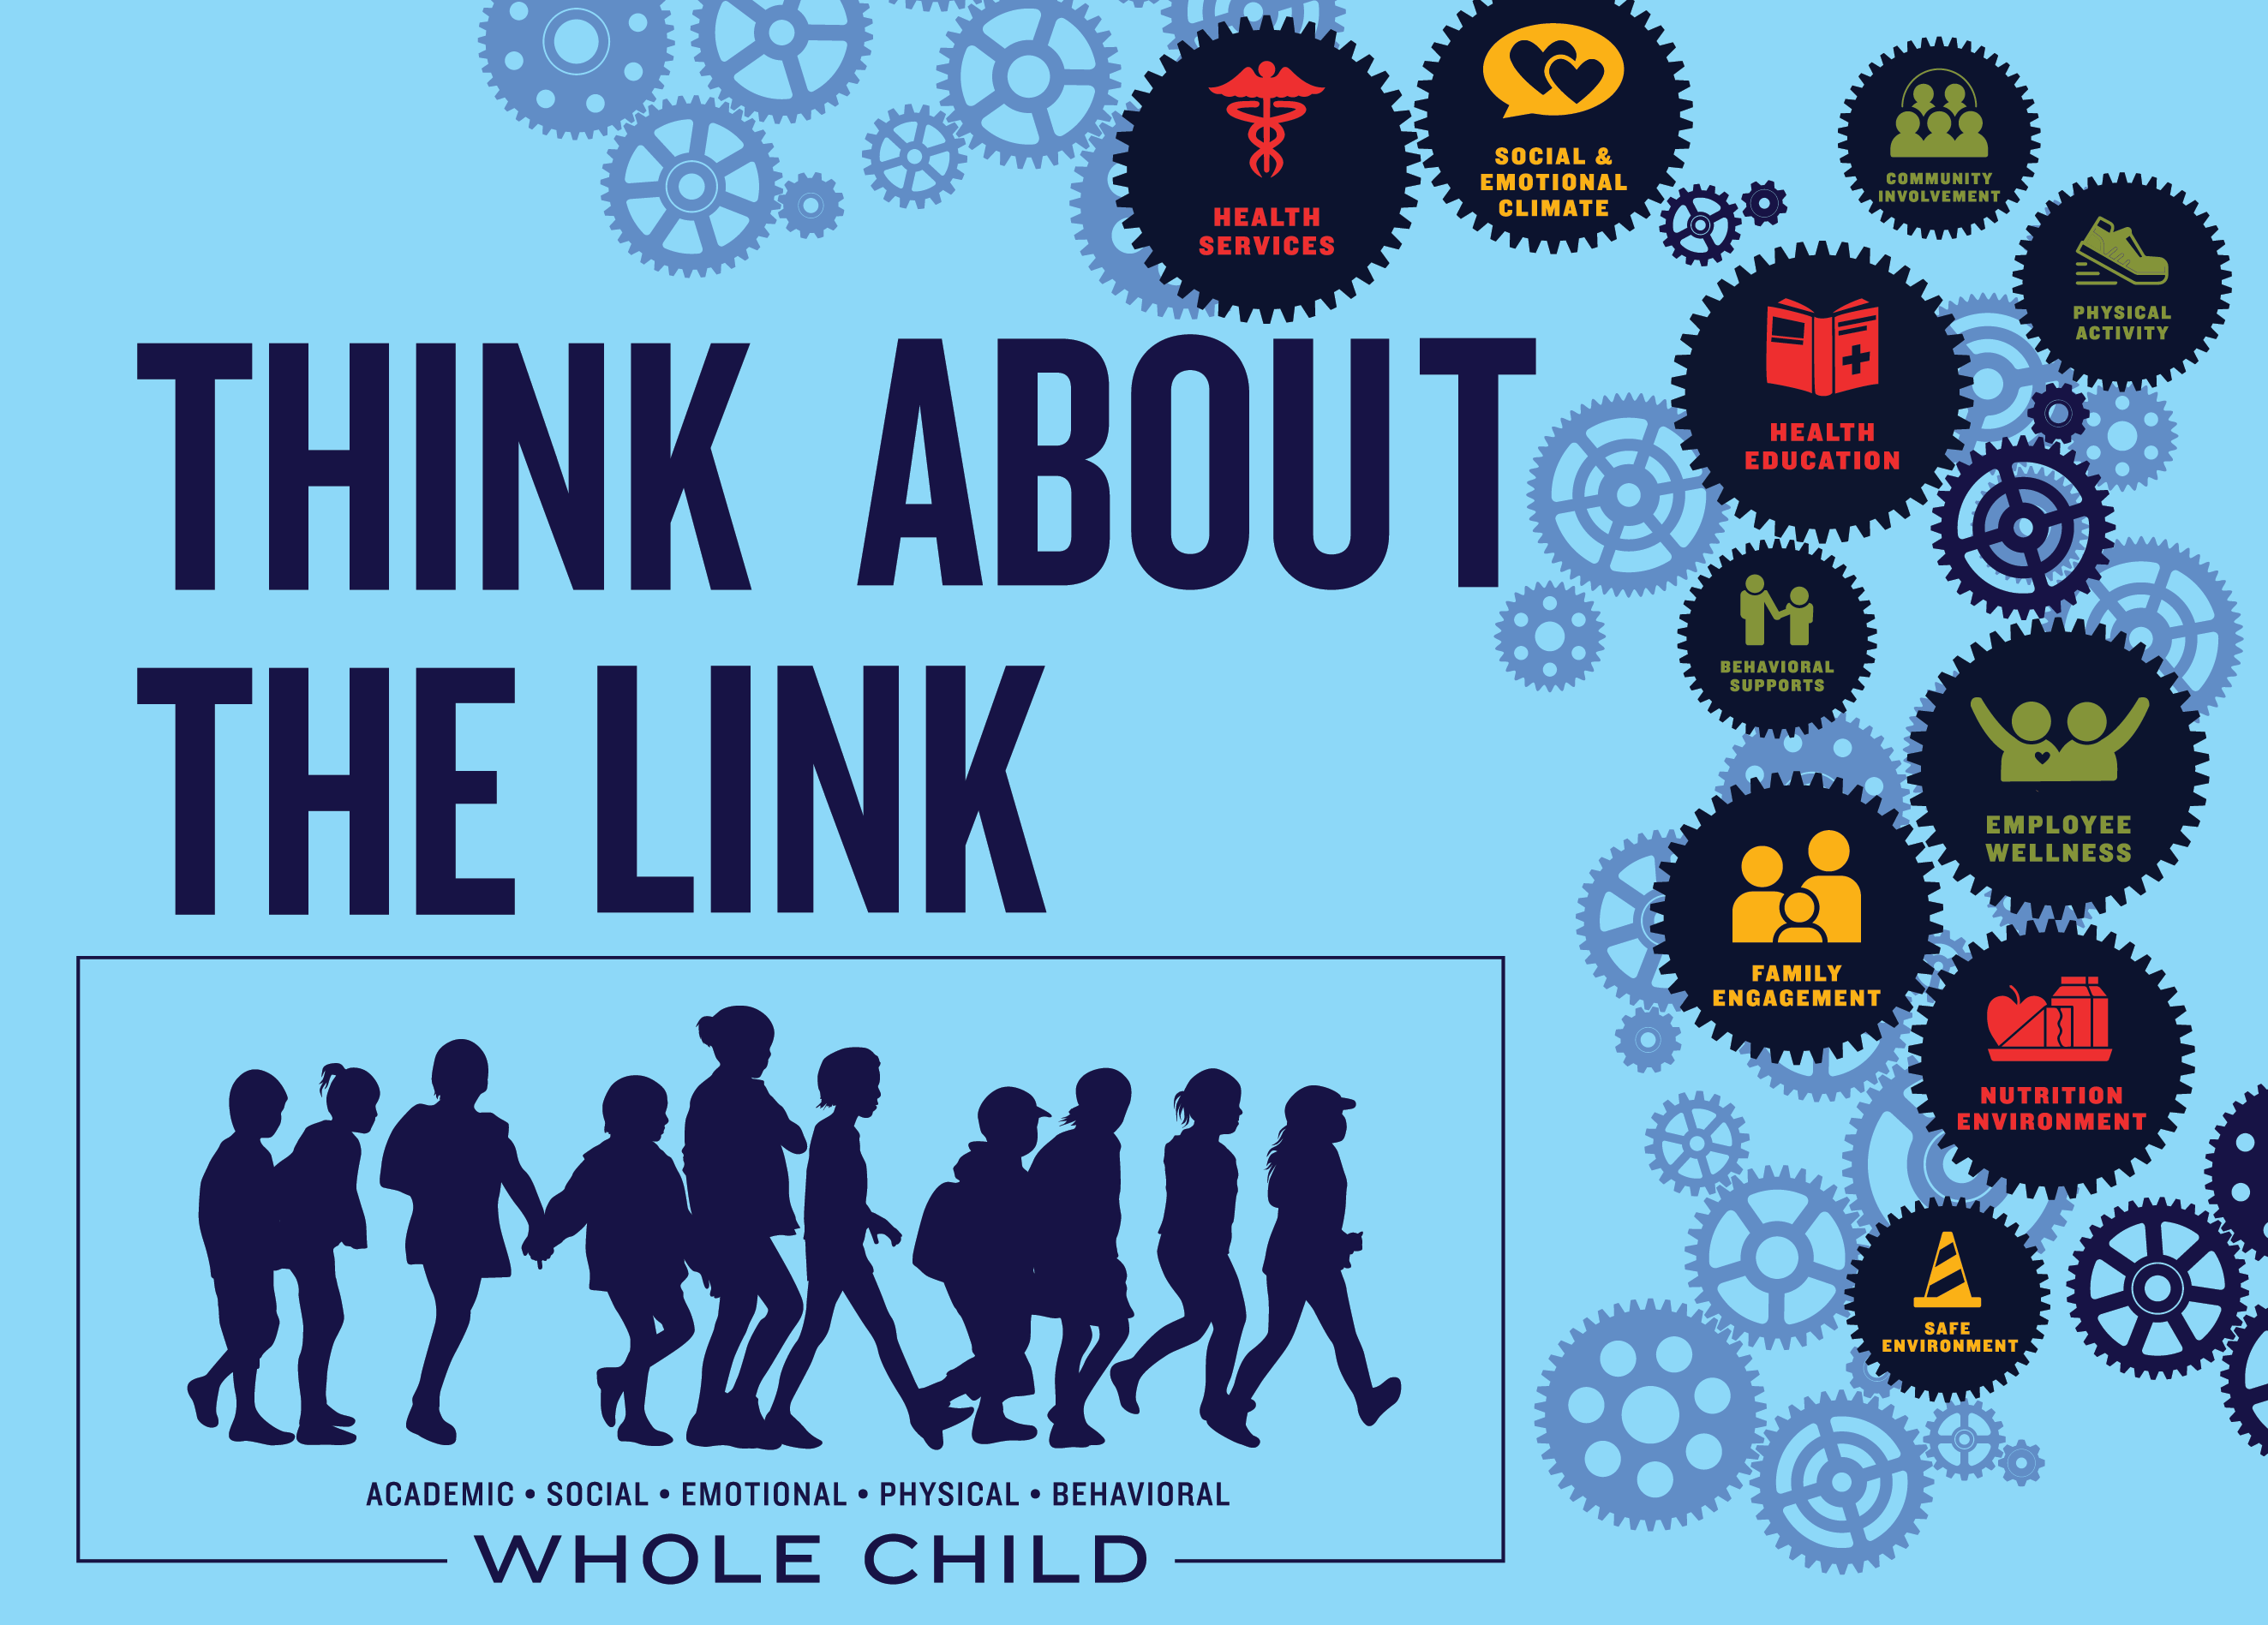 Think about the Link academic social emotional physical behavioral shows gears with 10 domains of whole school, whole community, whole child model in each gear with blue children walking together